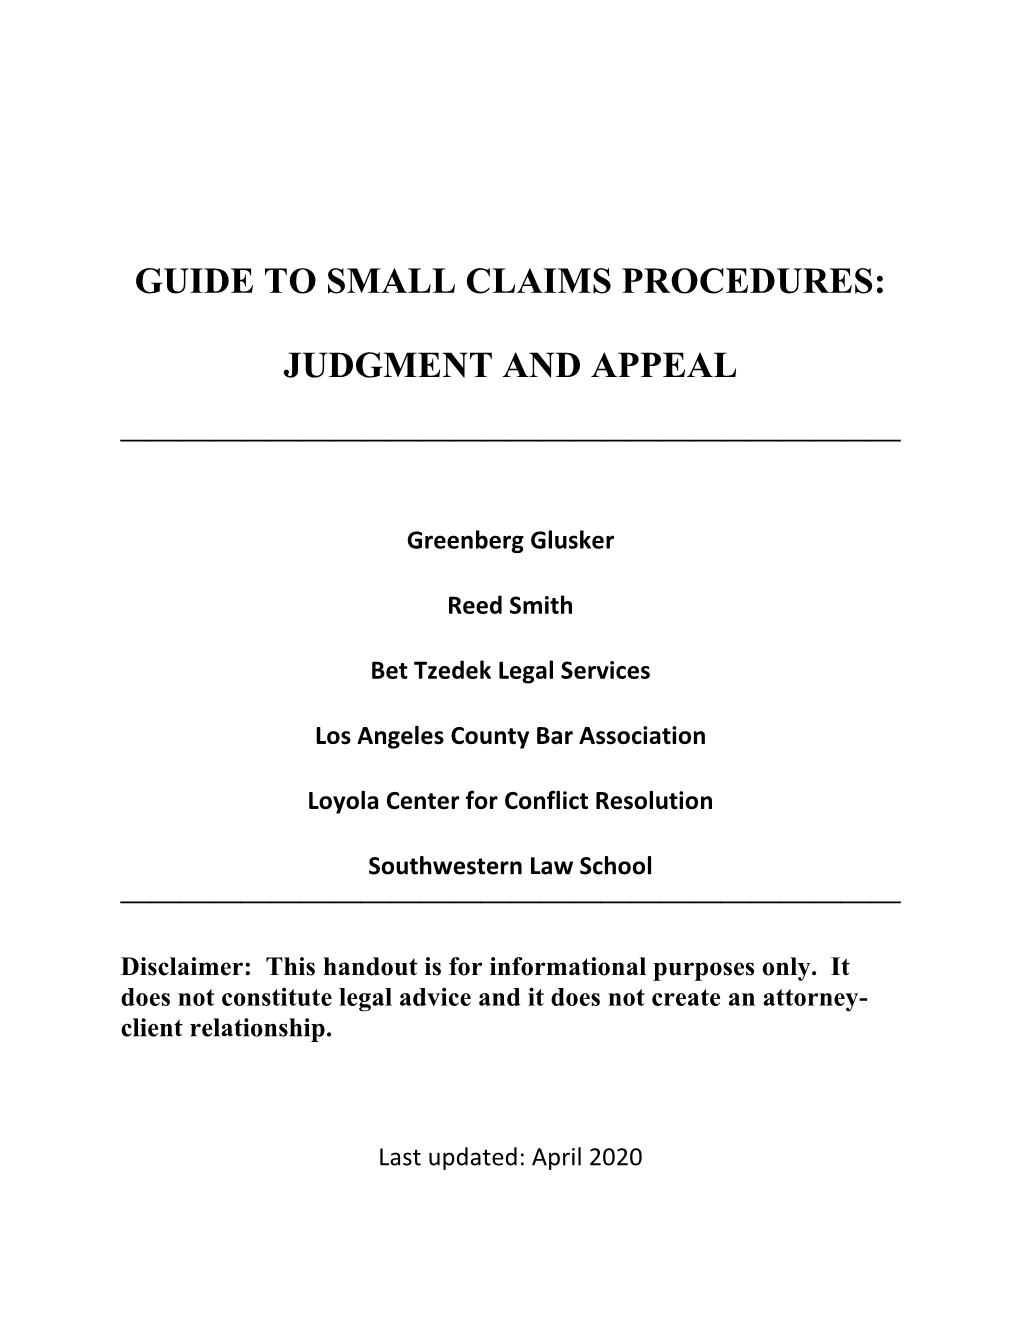 Guide to Small Claims Procedures: Judgment And